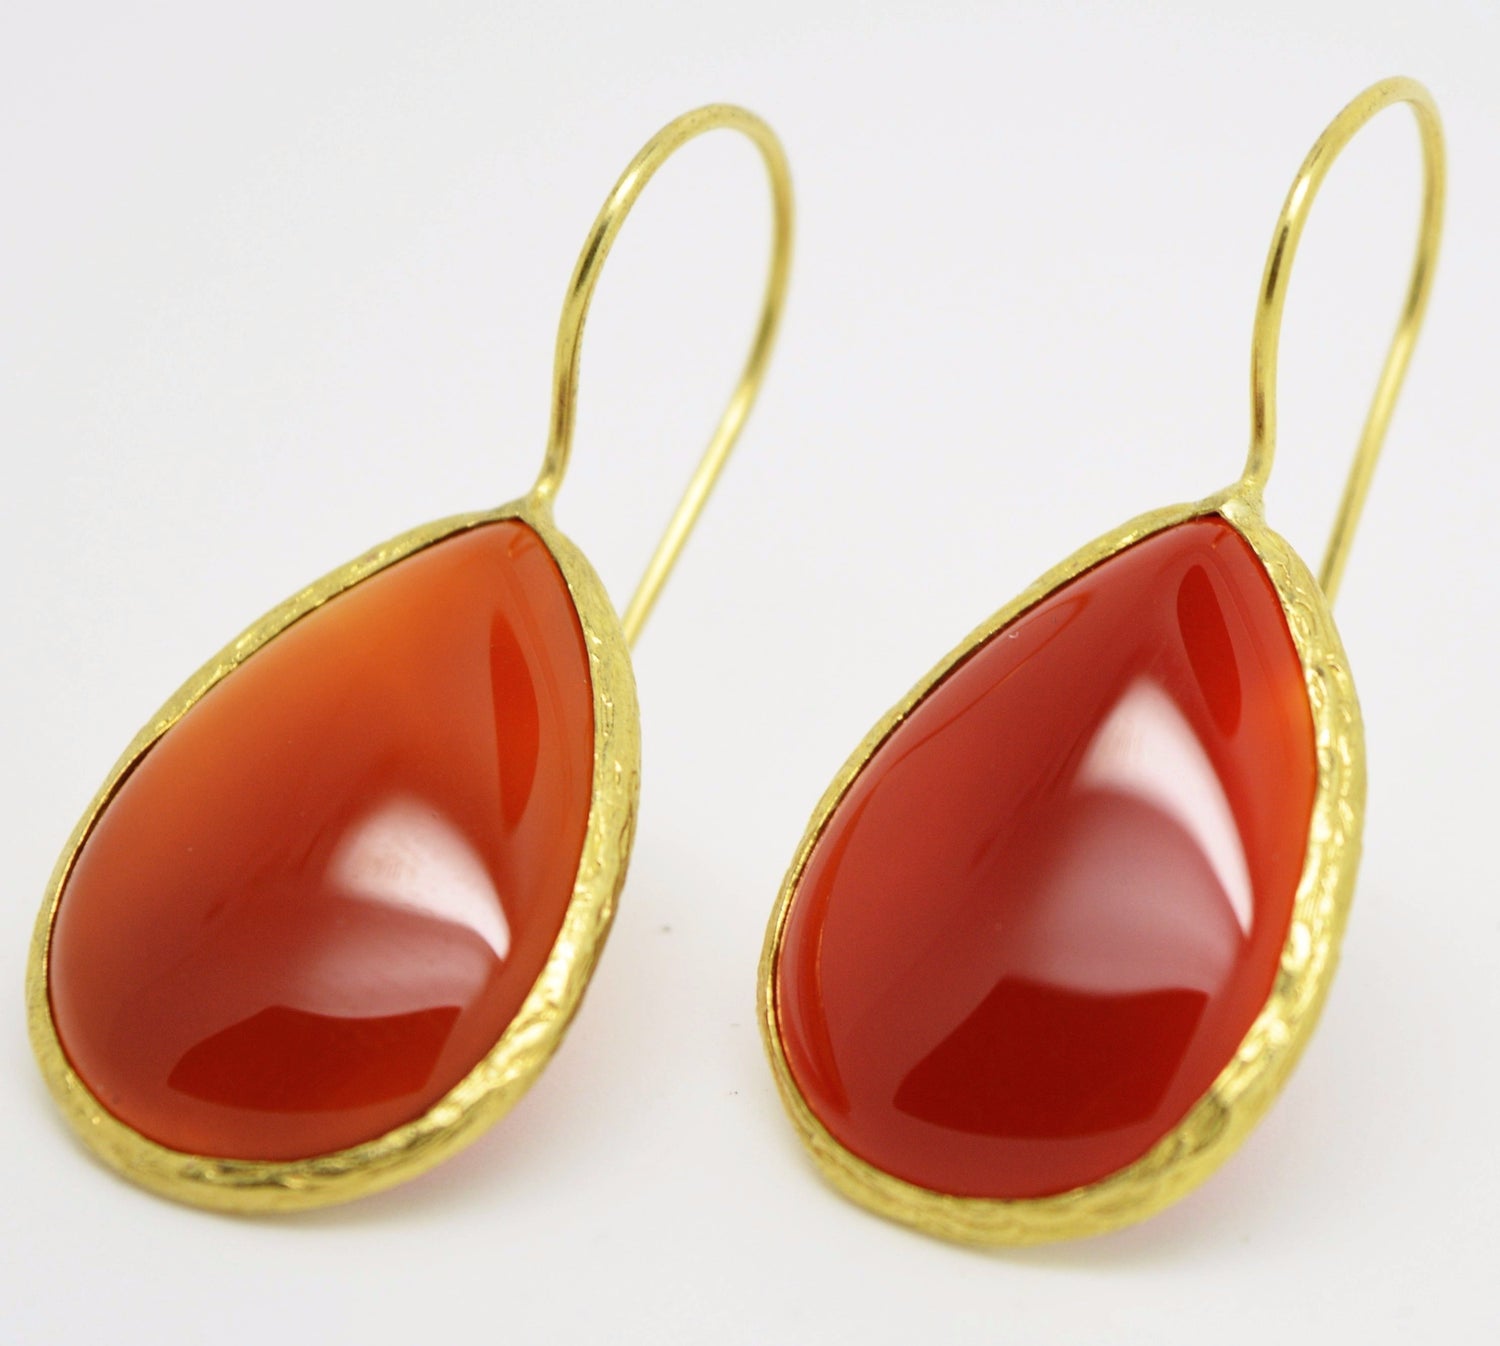 Aylas Amber earrings - 21ct Gold plated semi precious gemstone - Handmade in Ottoman Style by Artisan